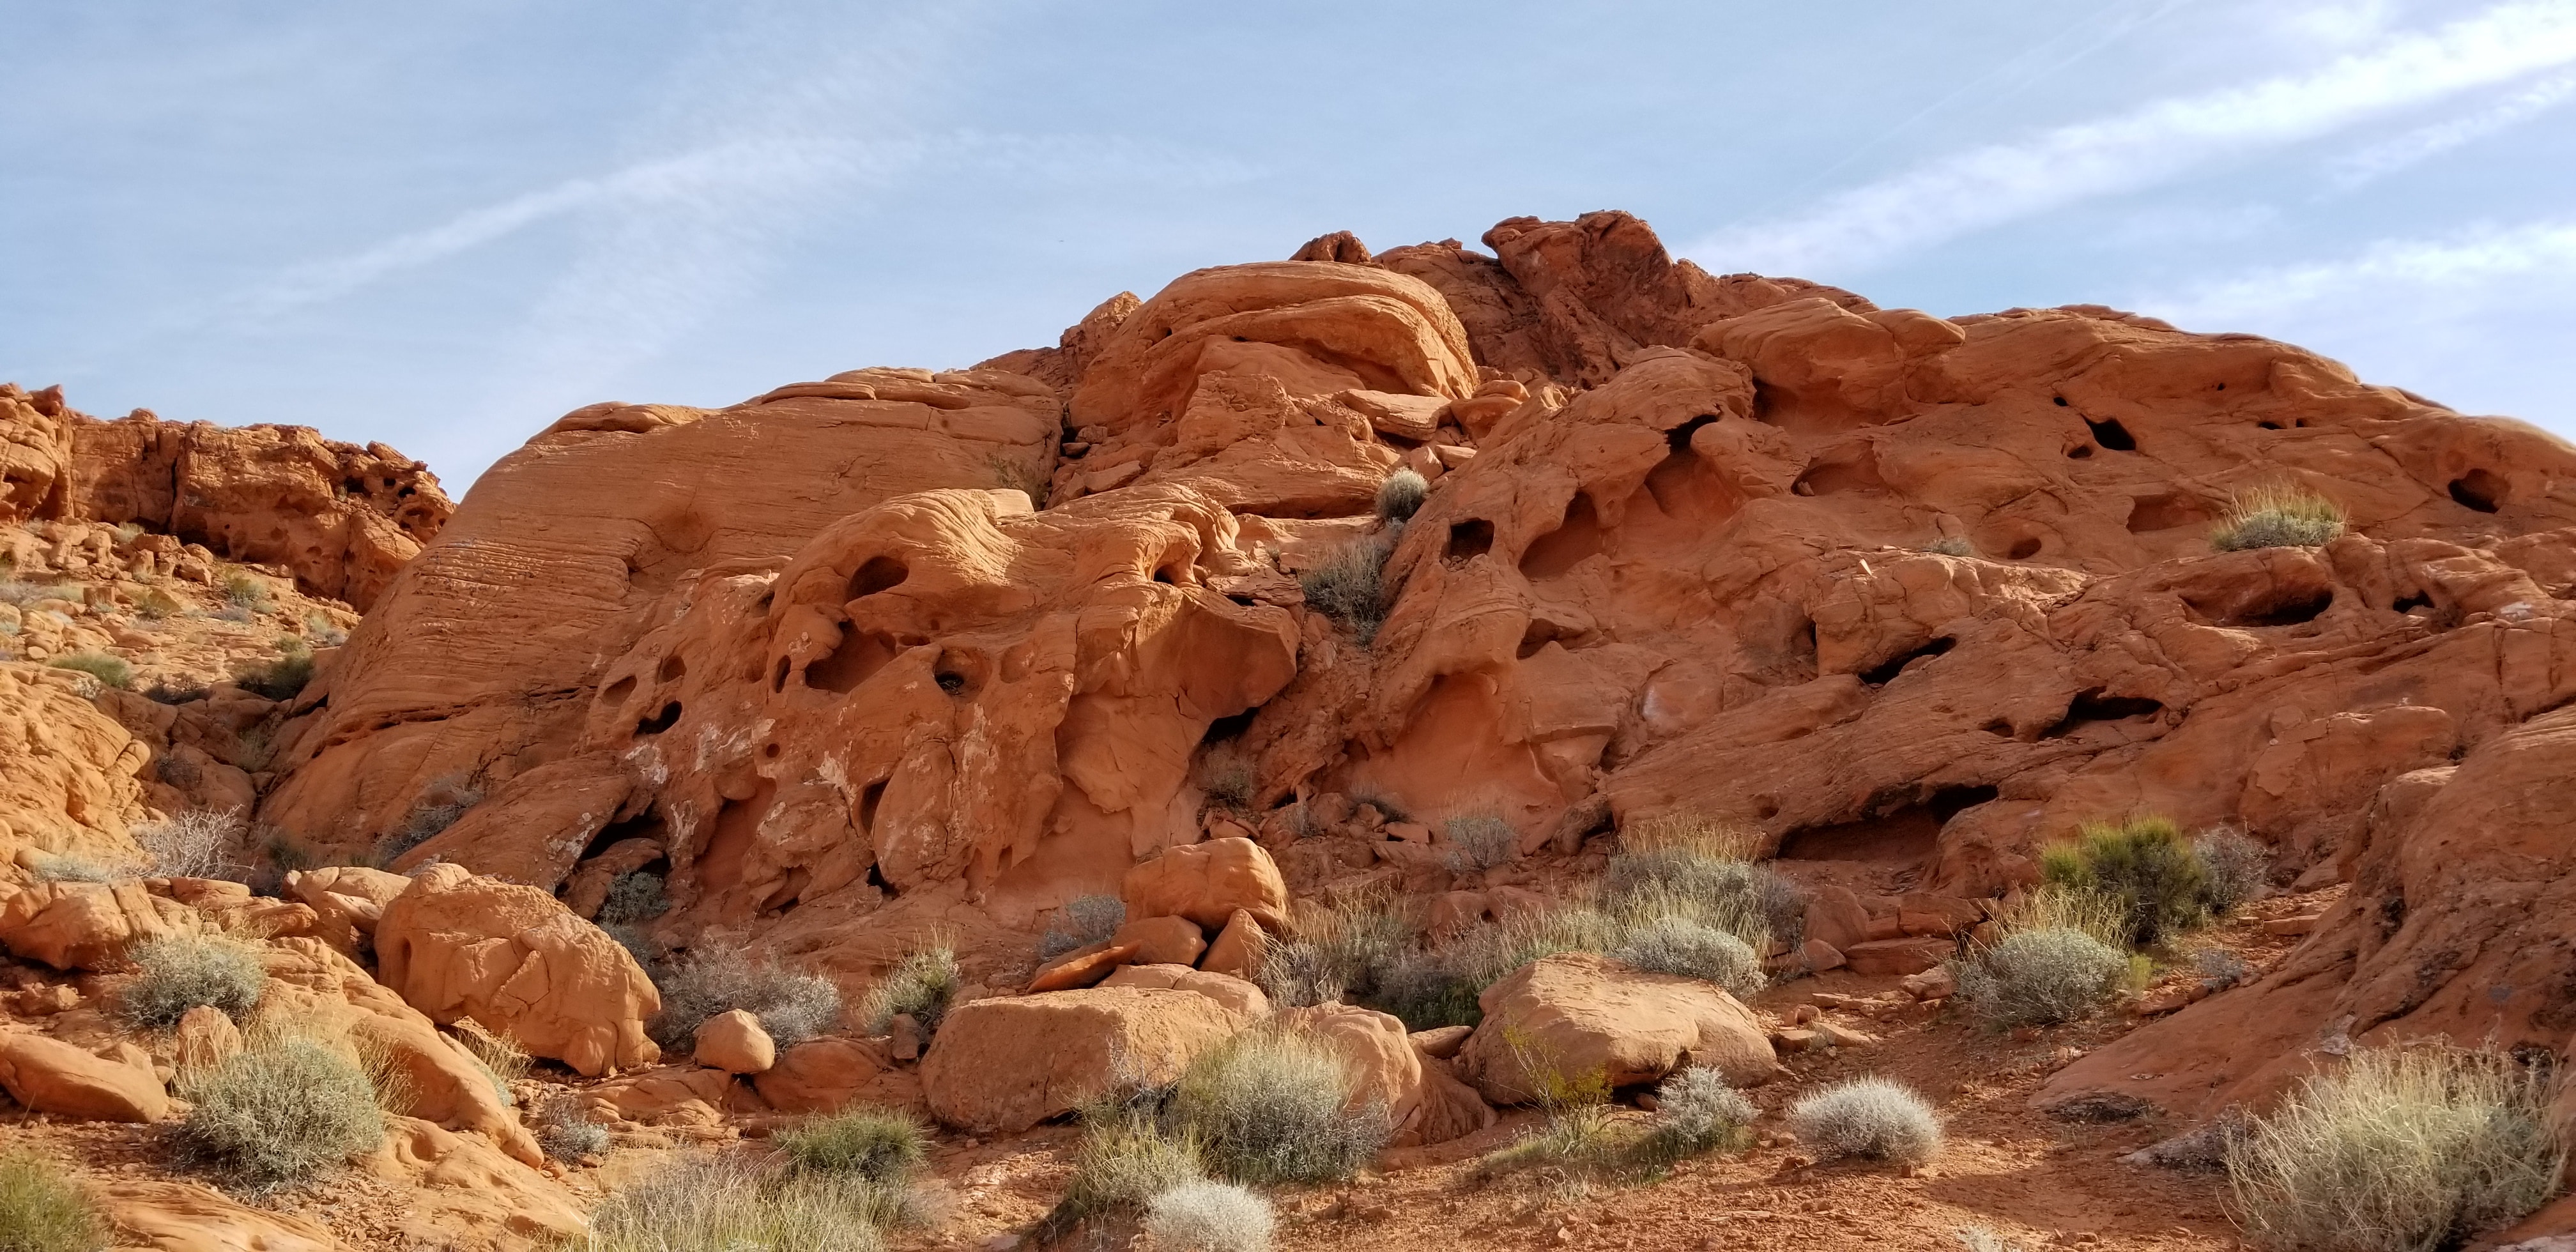 Rock Formations in the Red Rock Hills South of Elephant Rock Loop in Valley of Fire State Park, Nevada